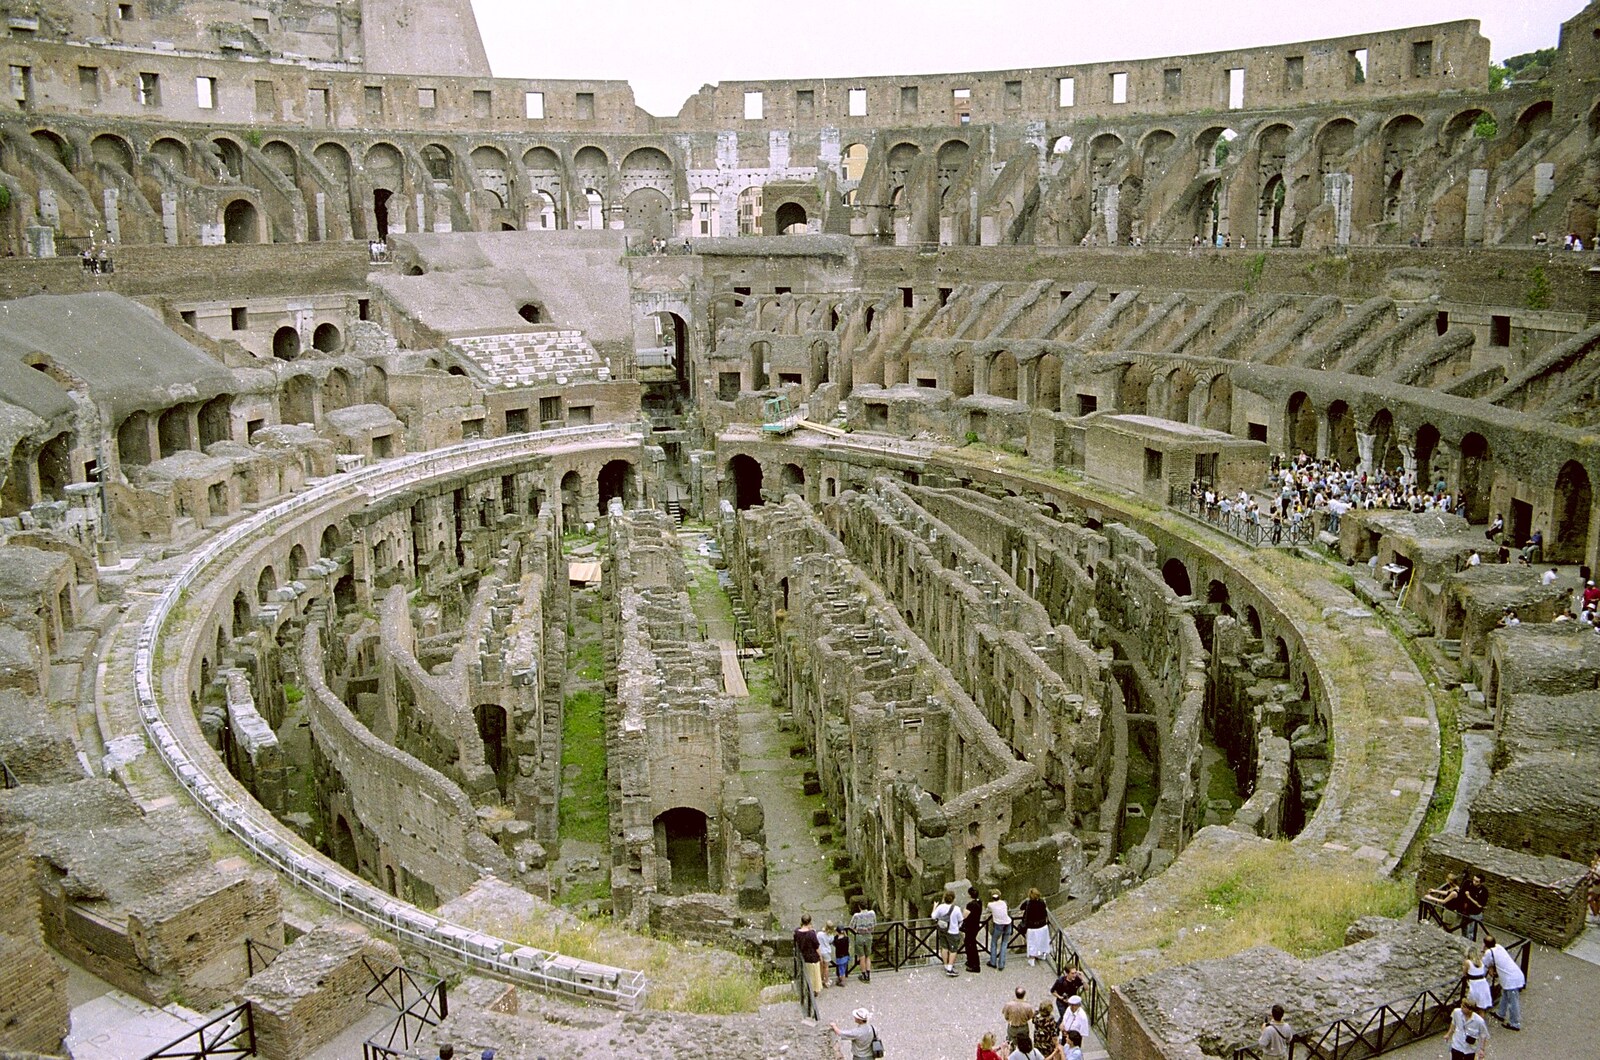 Tour groups mill around inside the Colosseum from A Working Trip to Rome, Italy - 10th September 1999